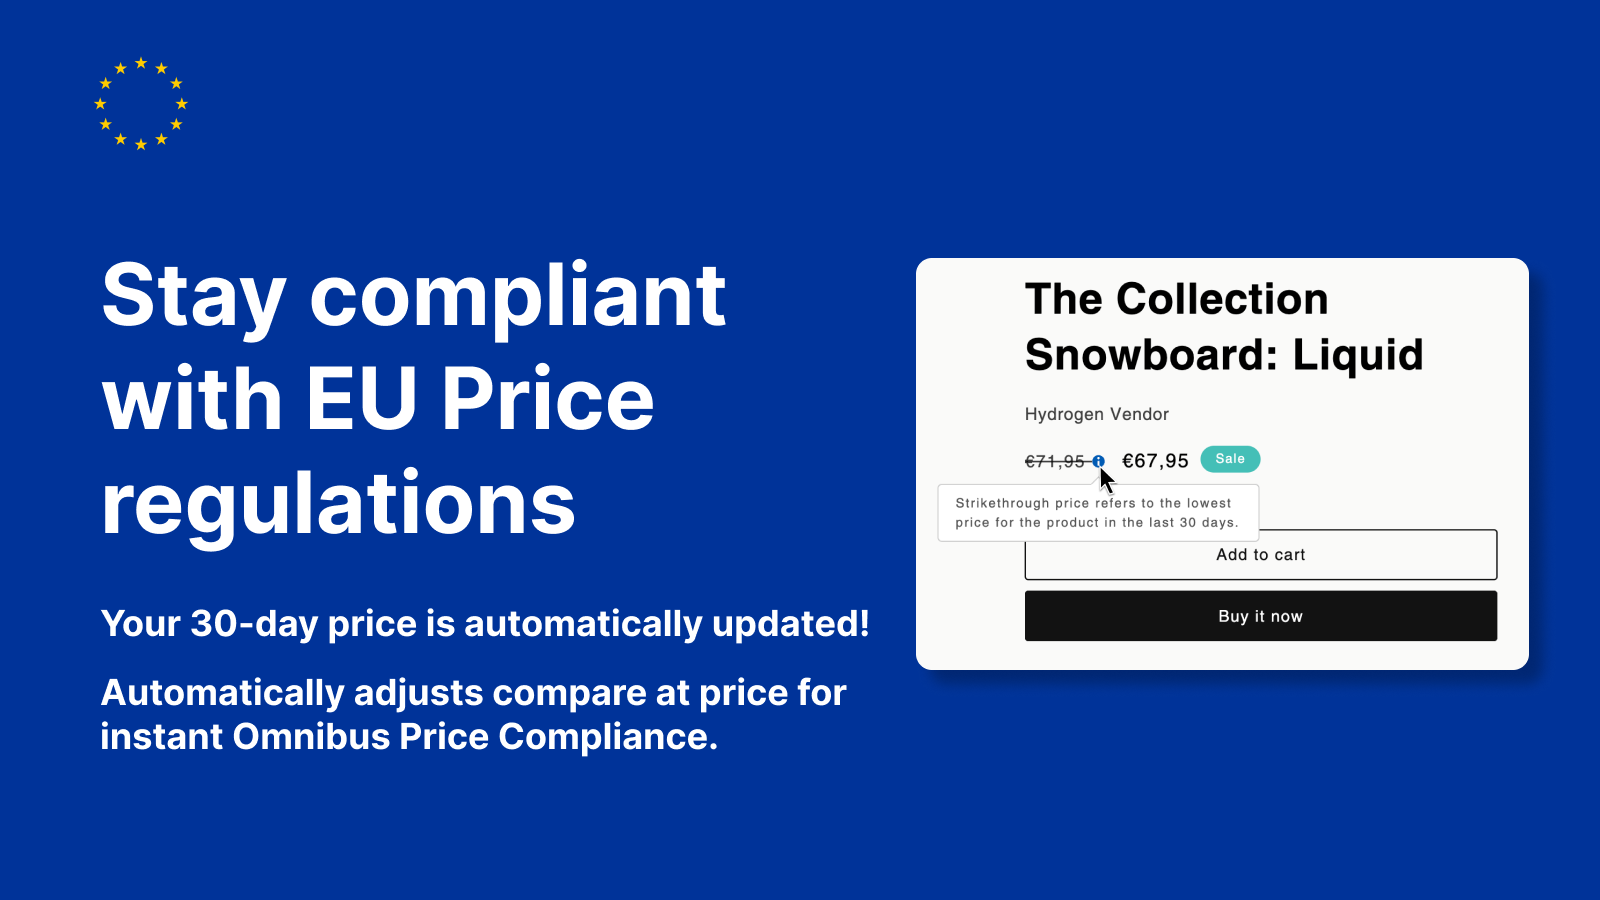 Stay compliant with EU price regulations - on autopilot